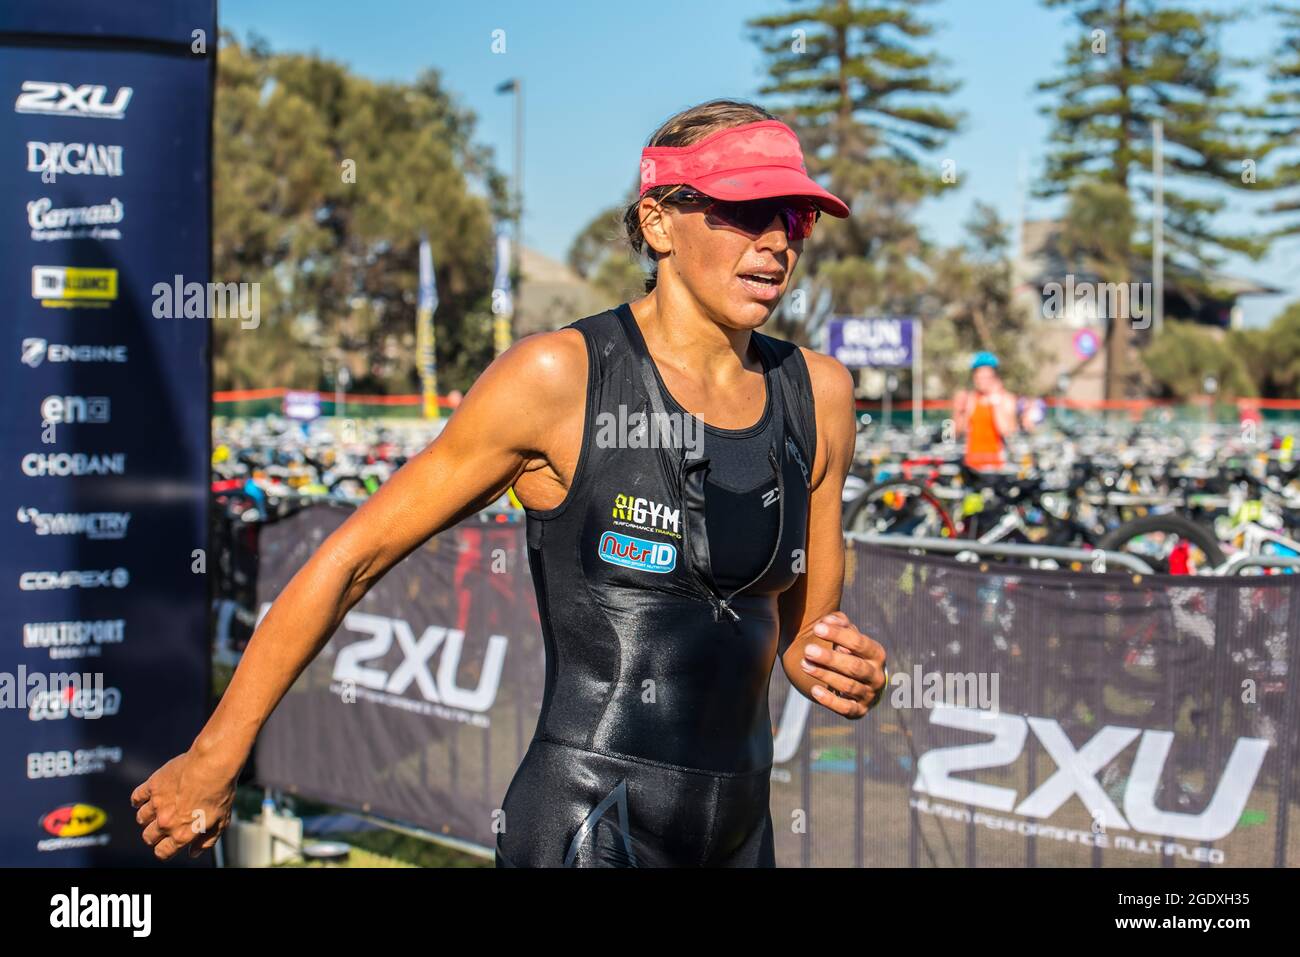 Triathlete Wilms from Nederland's seen finishing the during the 2XU Triathlon Series 2021 at Elwood beach Stock Photo - Alamy